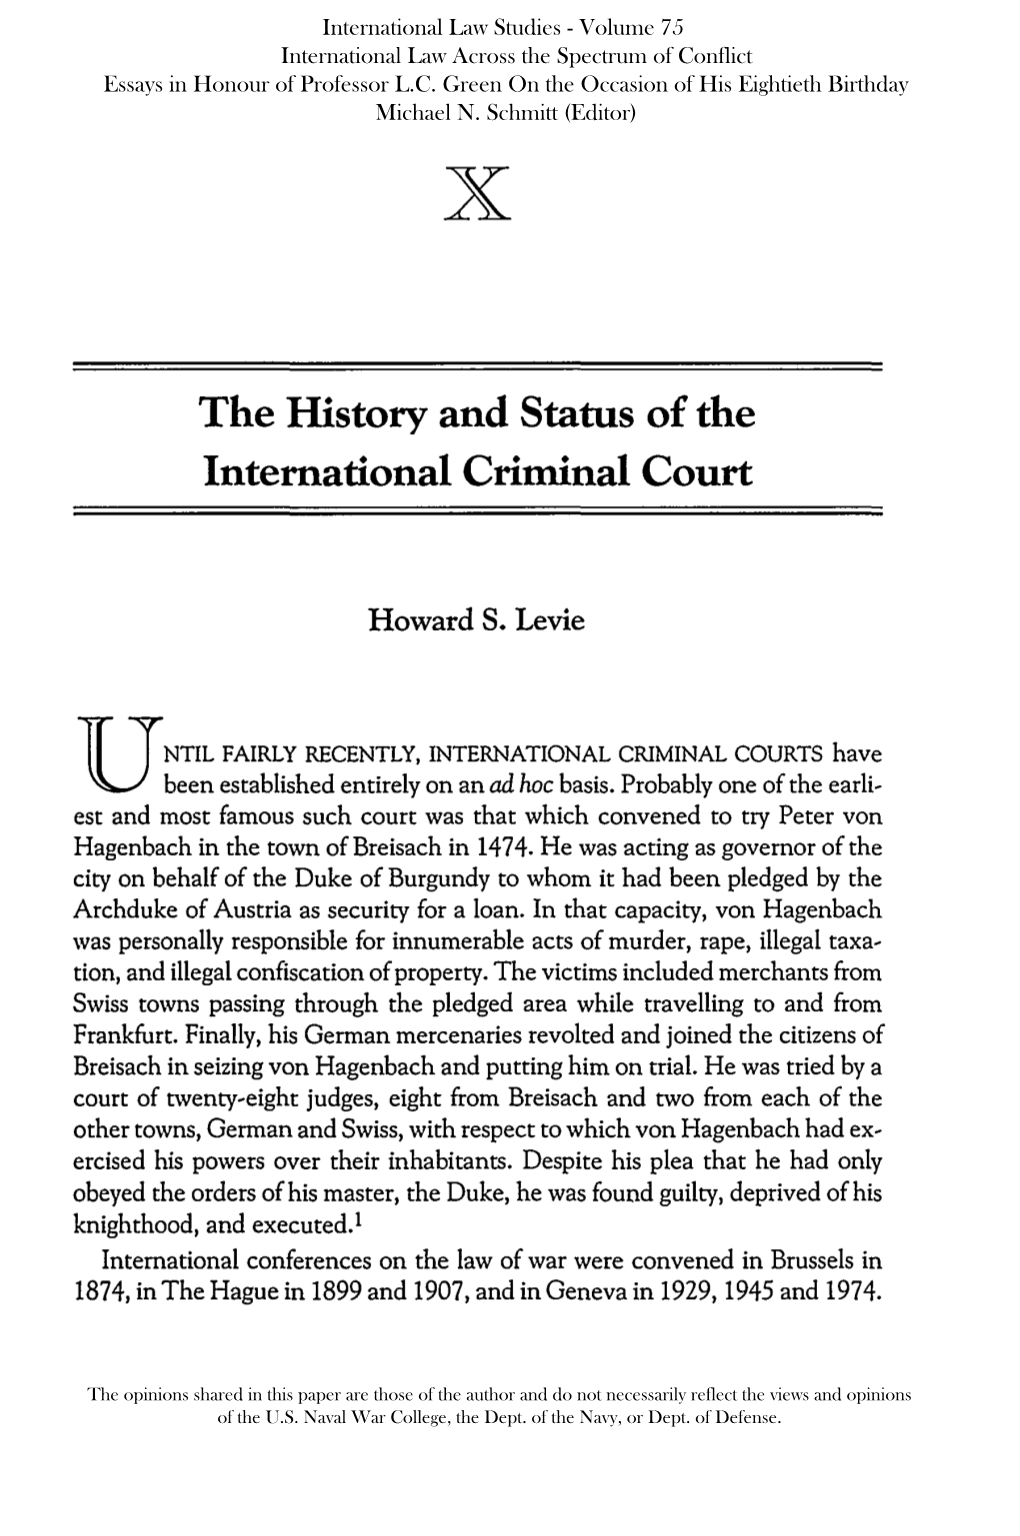 The History and Status of the International Criminal Court